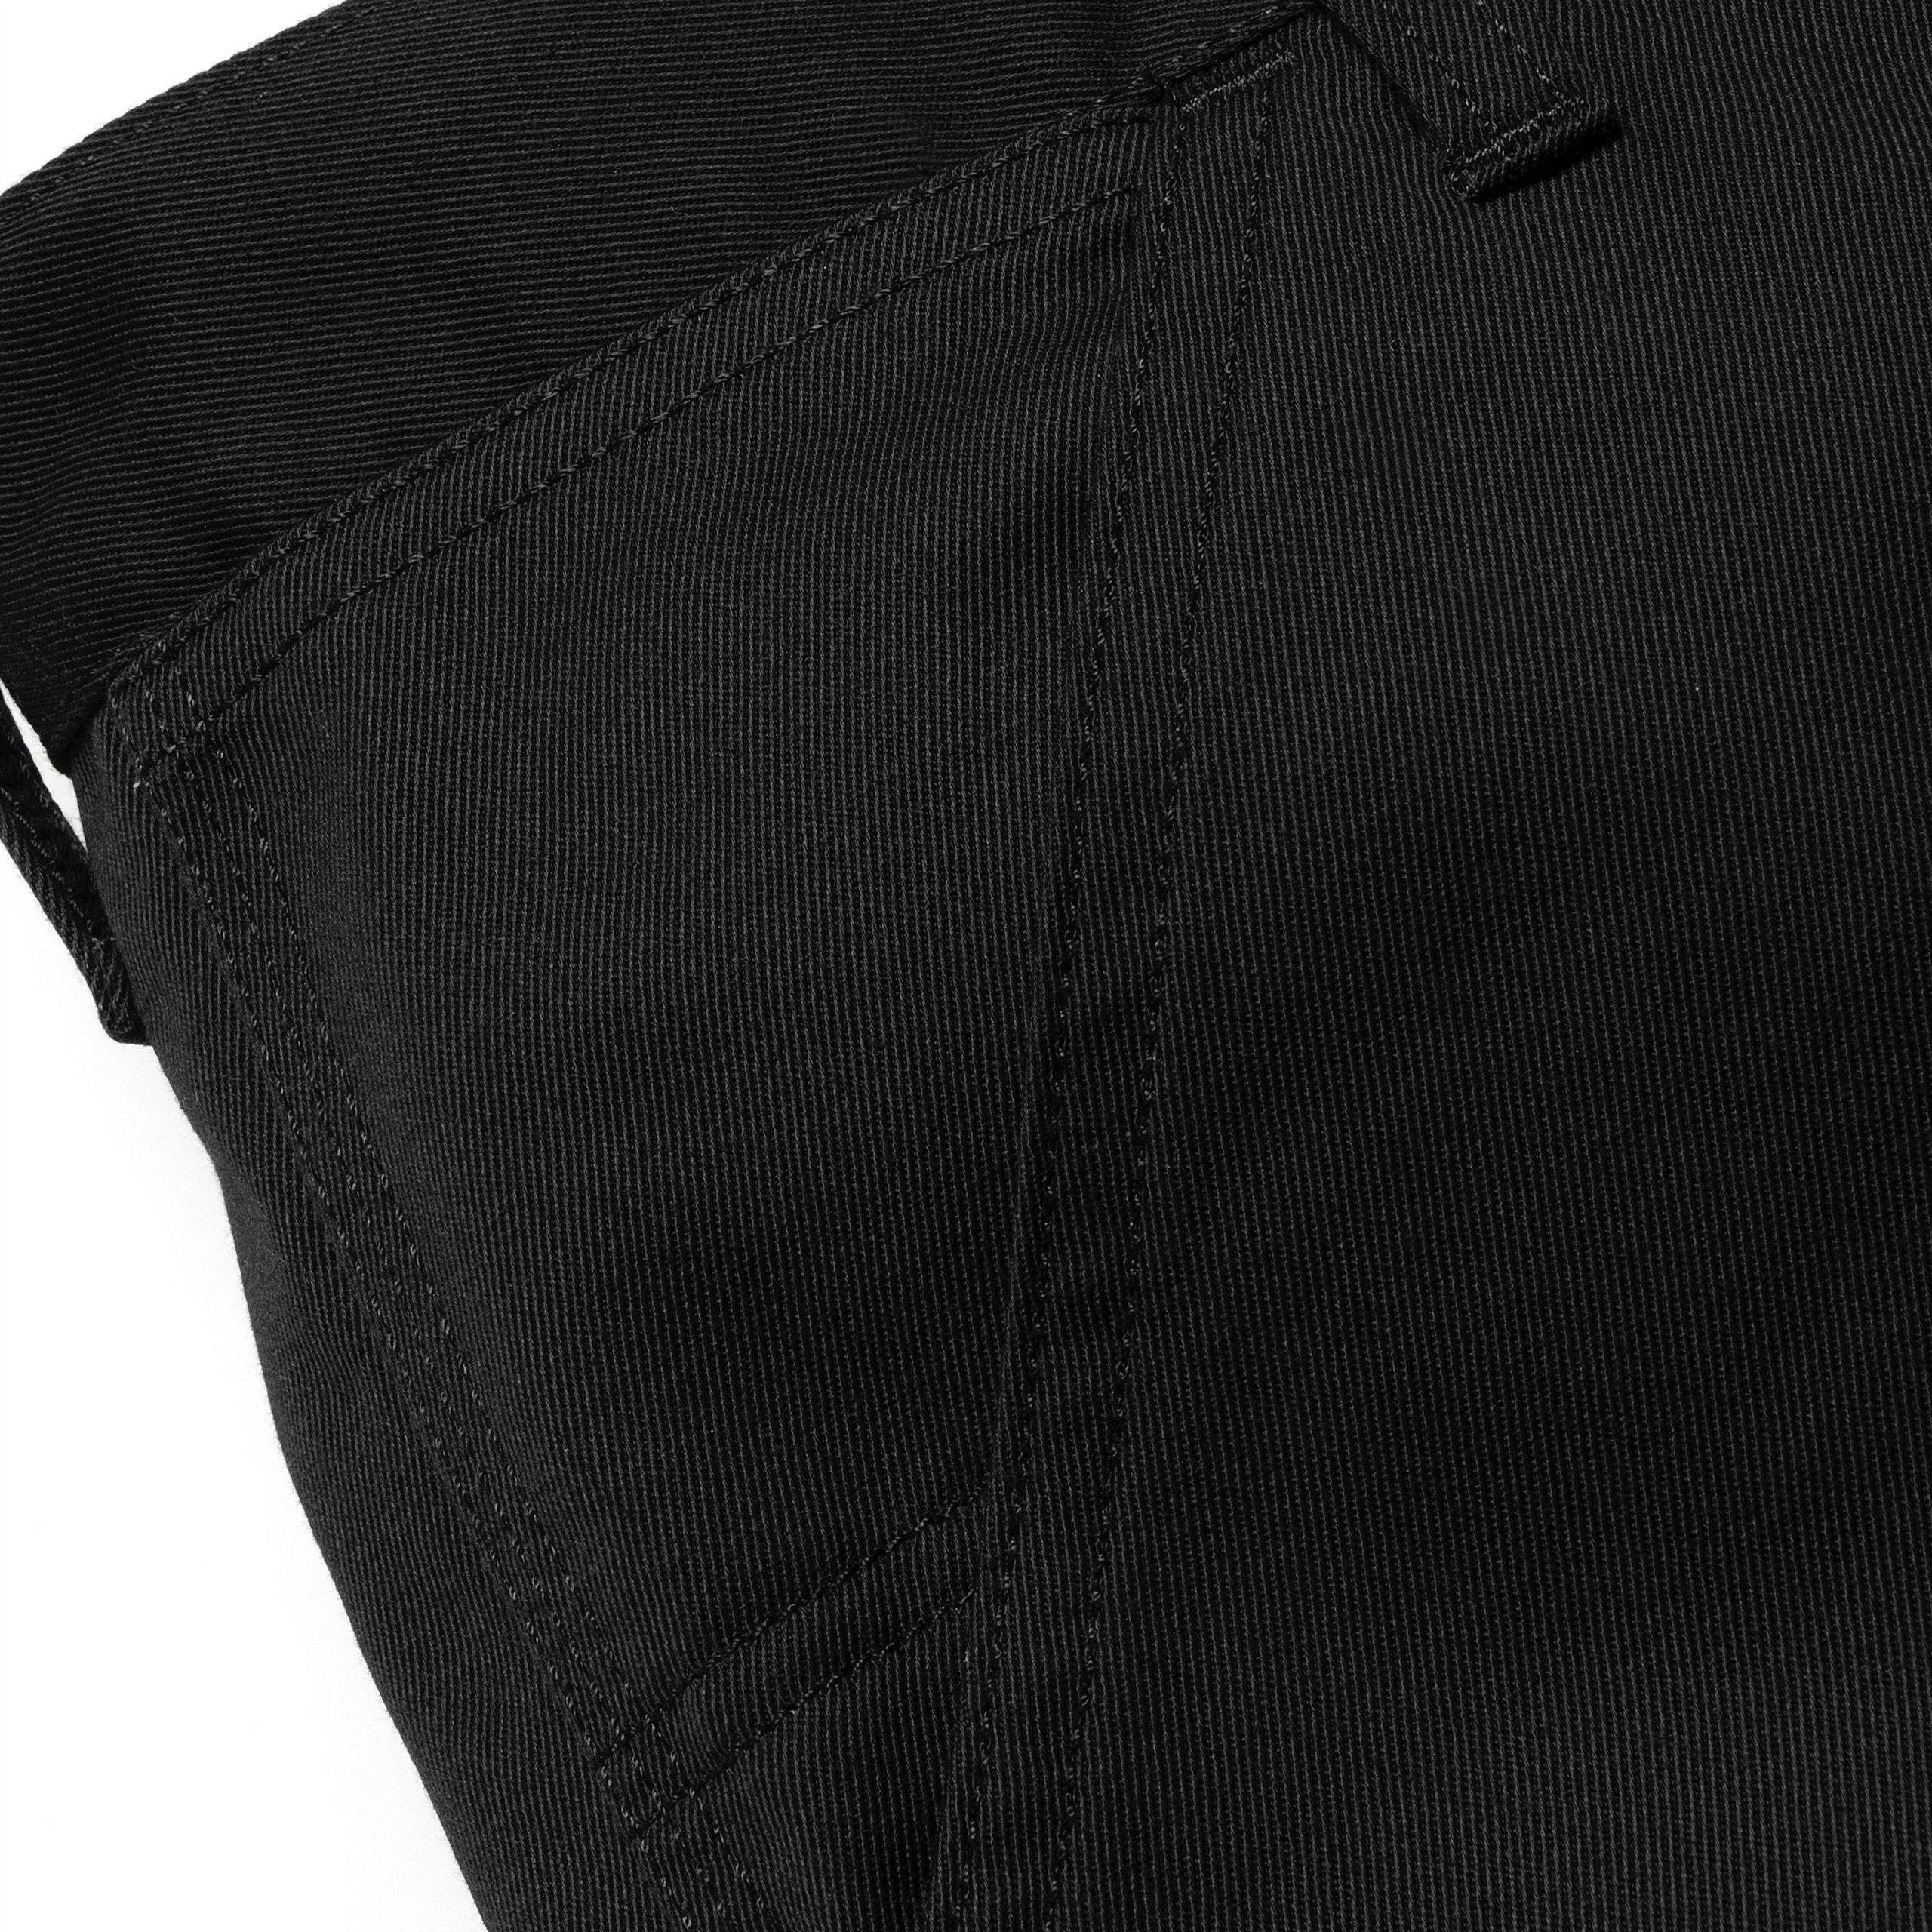 Carhartt Wip Simple Pant Polyester/cotton Denison Twill, 8.8 Oz Black Rinsed Uomo